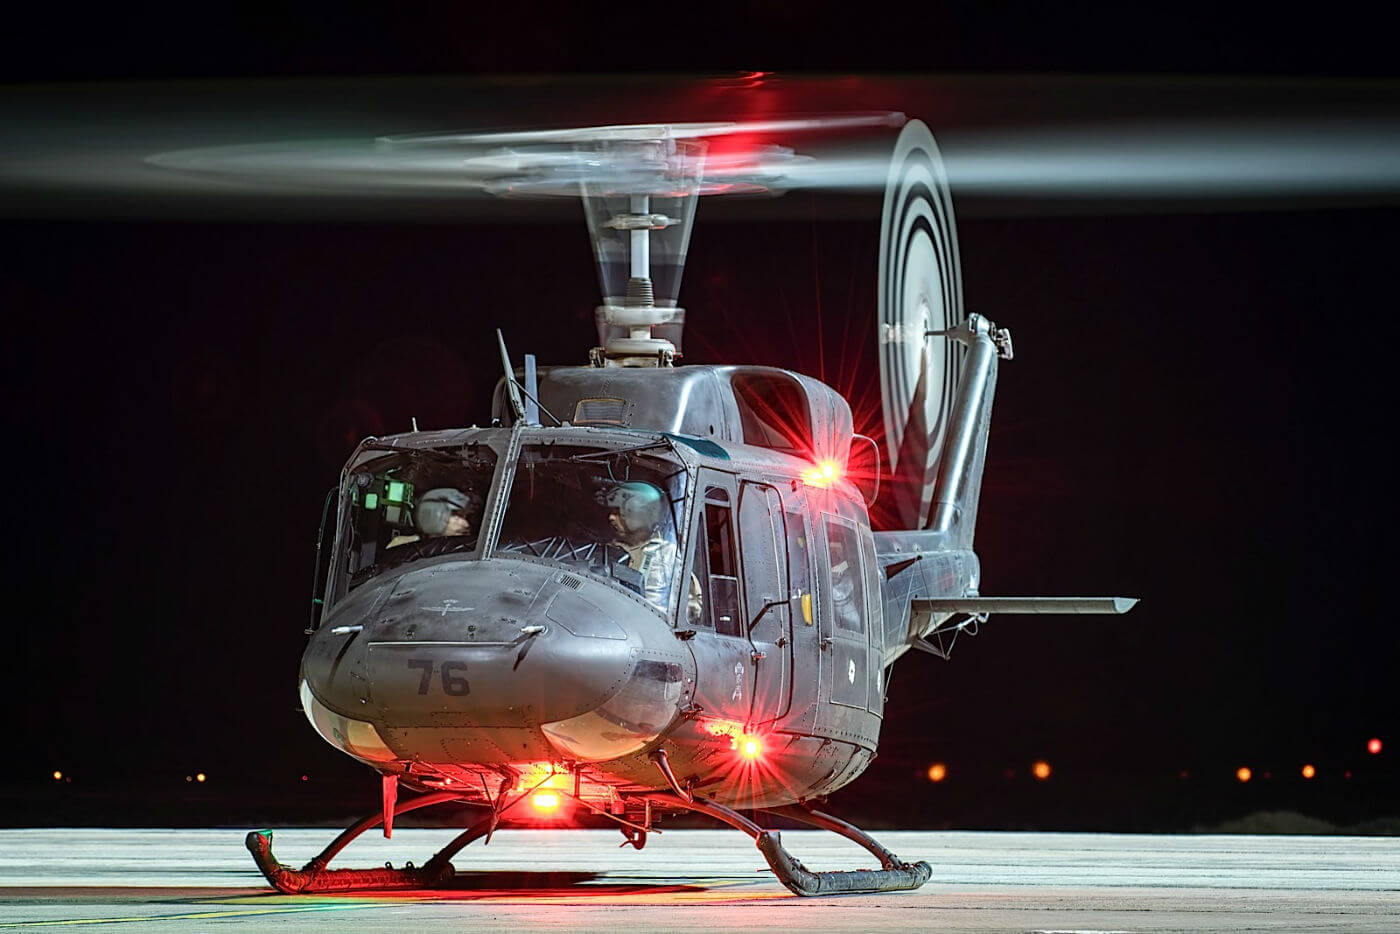 Night sorties were included in Exercise Famara, providing crews with valuable experience in flying tactically with night vision goggles.